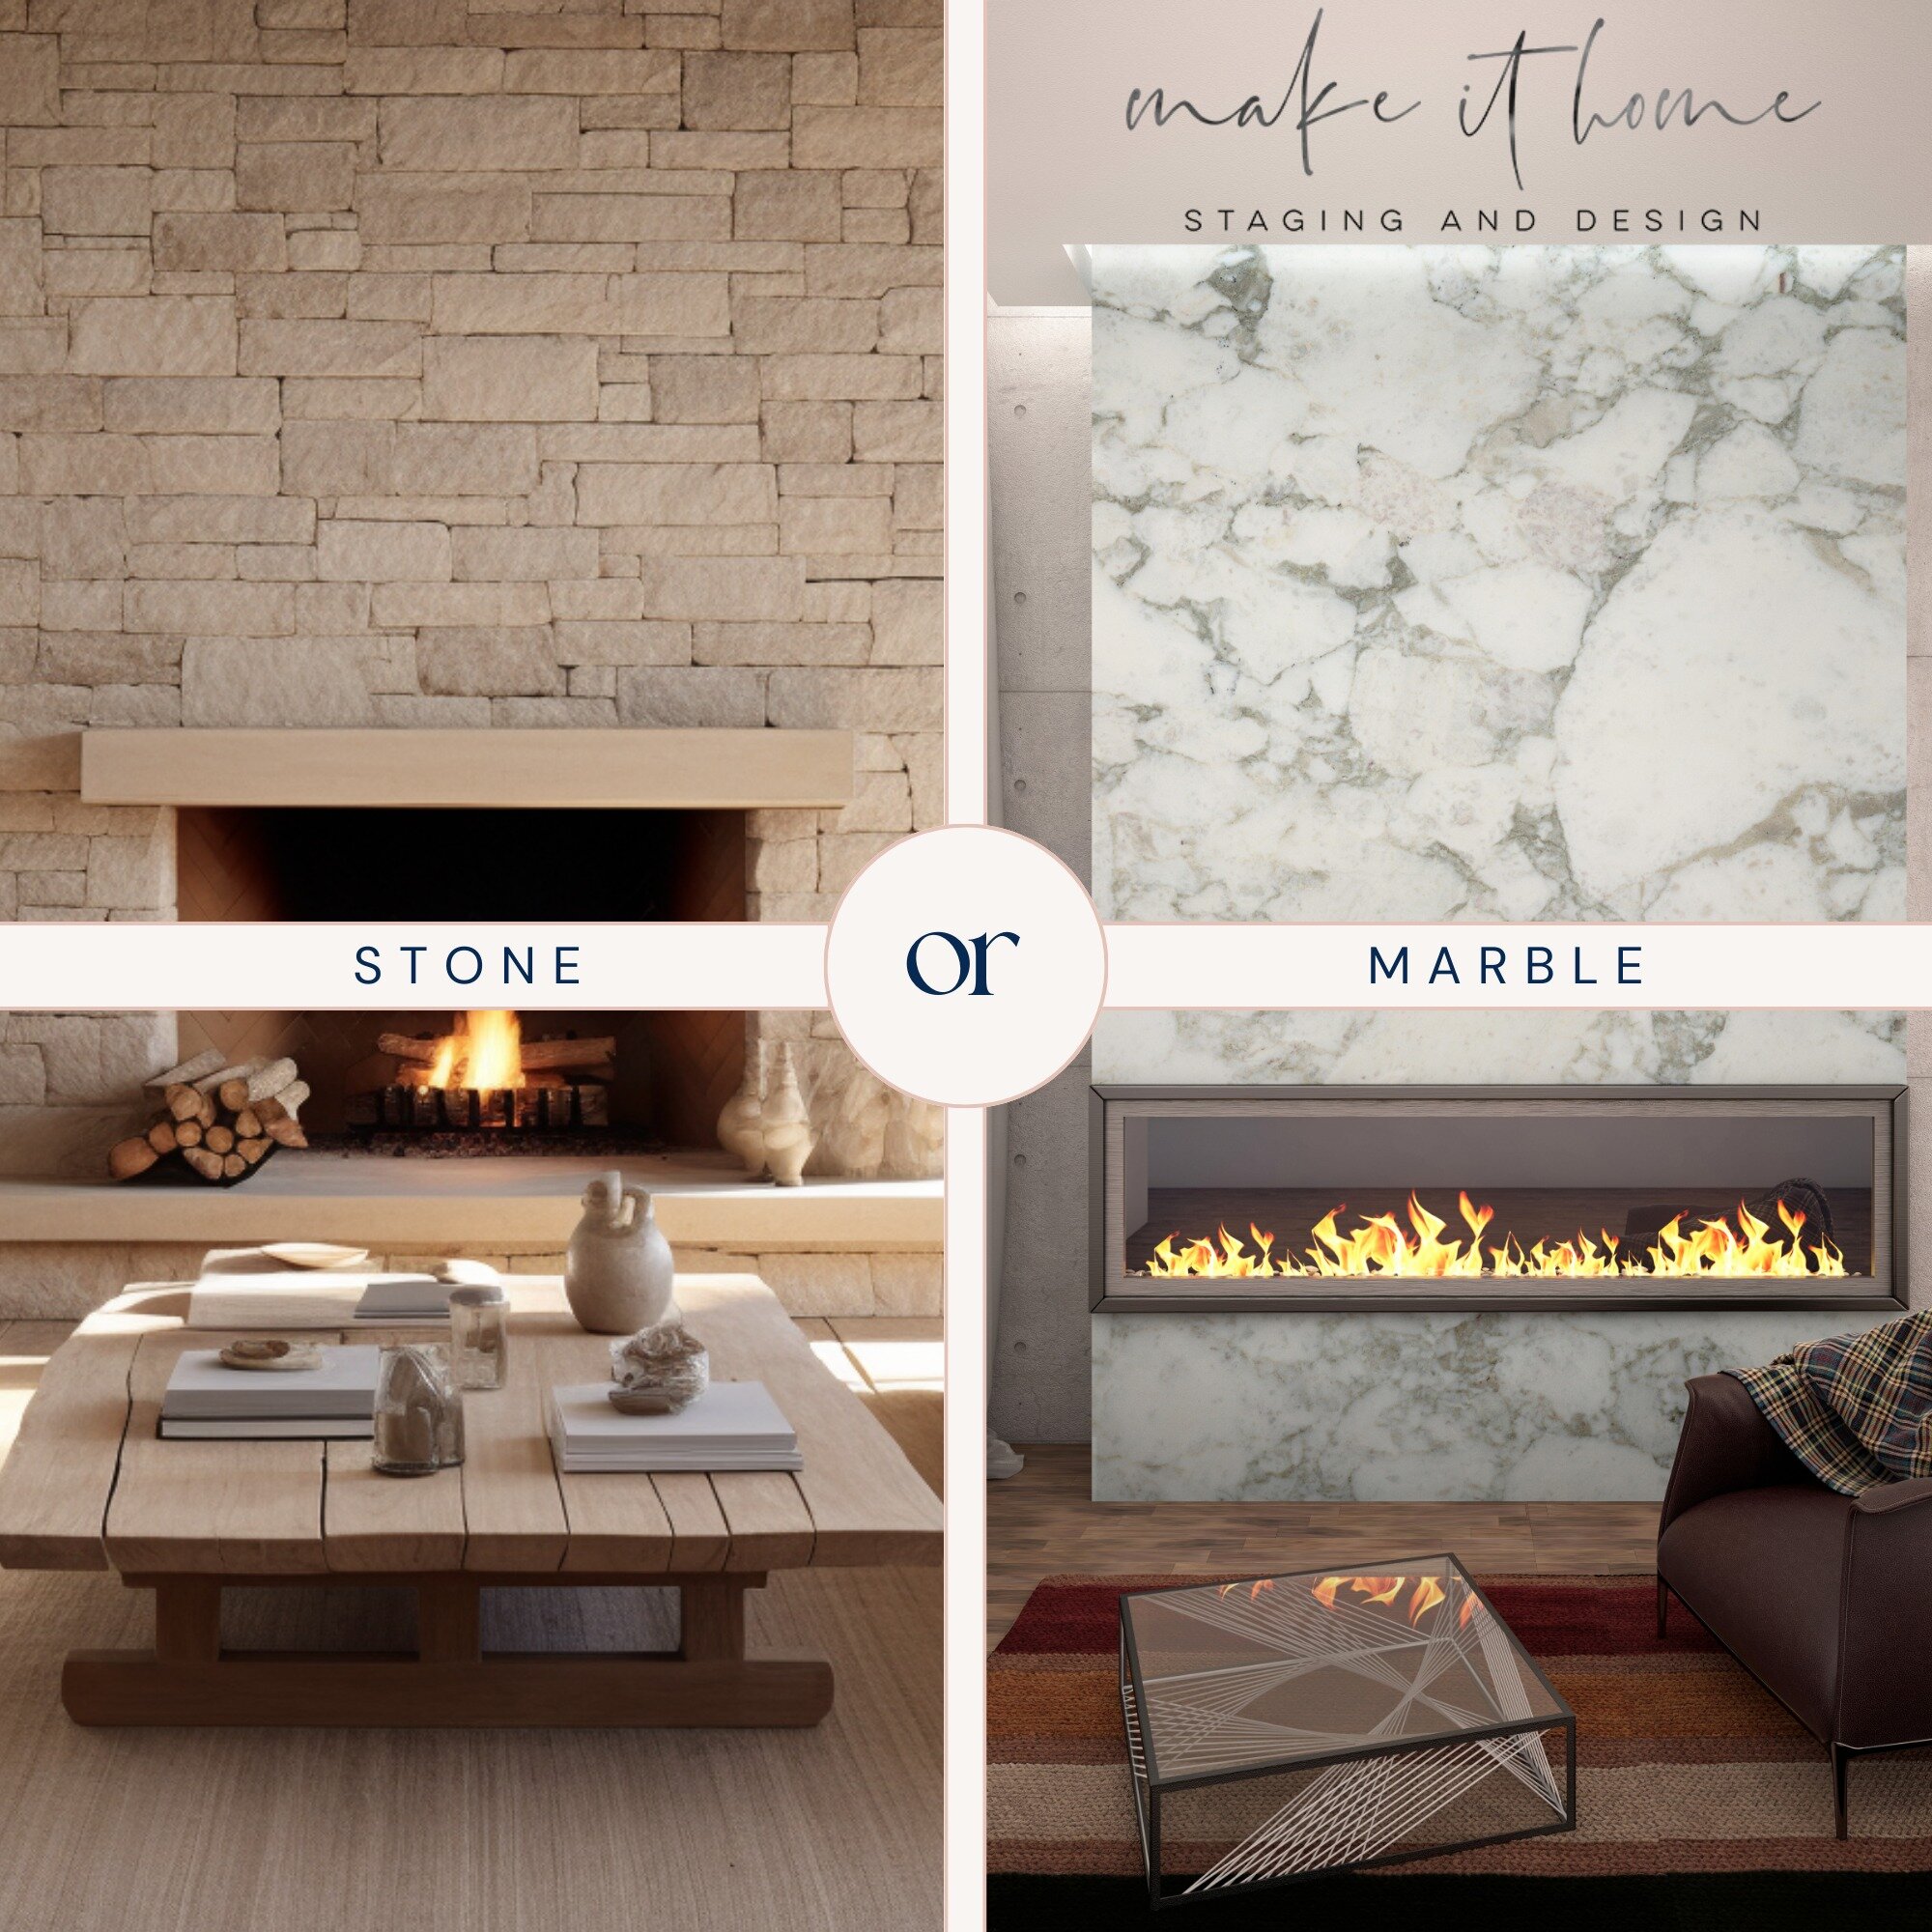 This or That? Do you prefer stone or marble? Let us know in the comments!

#thisorthat #stone #marble #homedecor #homedesign
#interiordesign #greenecountyva #greenecountyhomes
#makeithome #mih